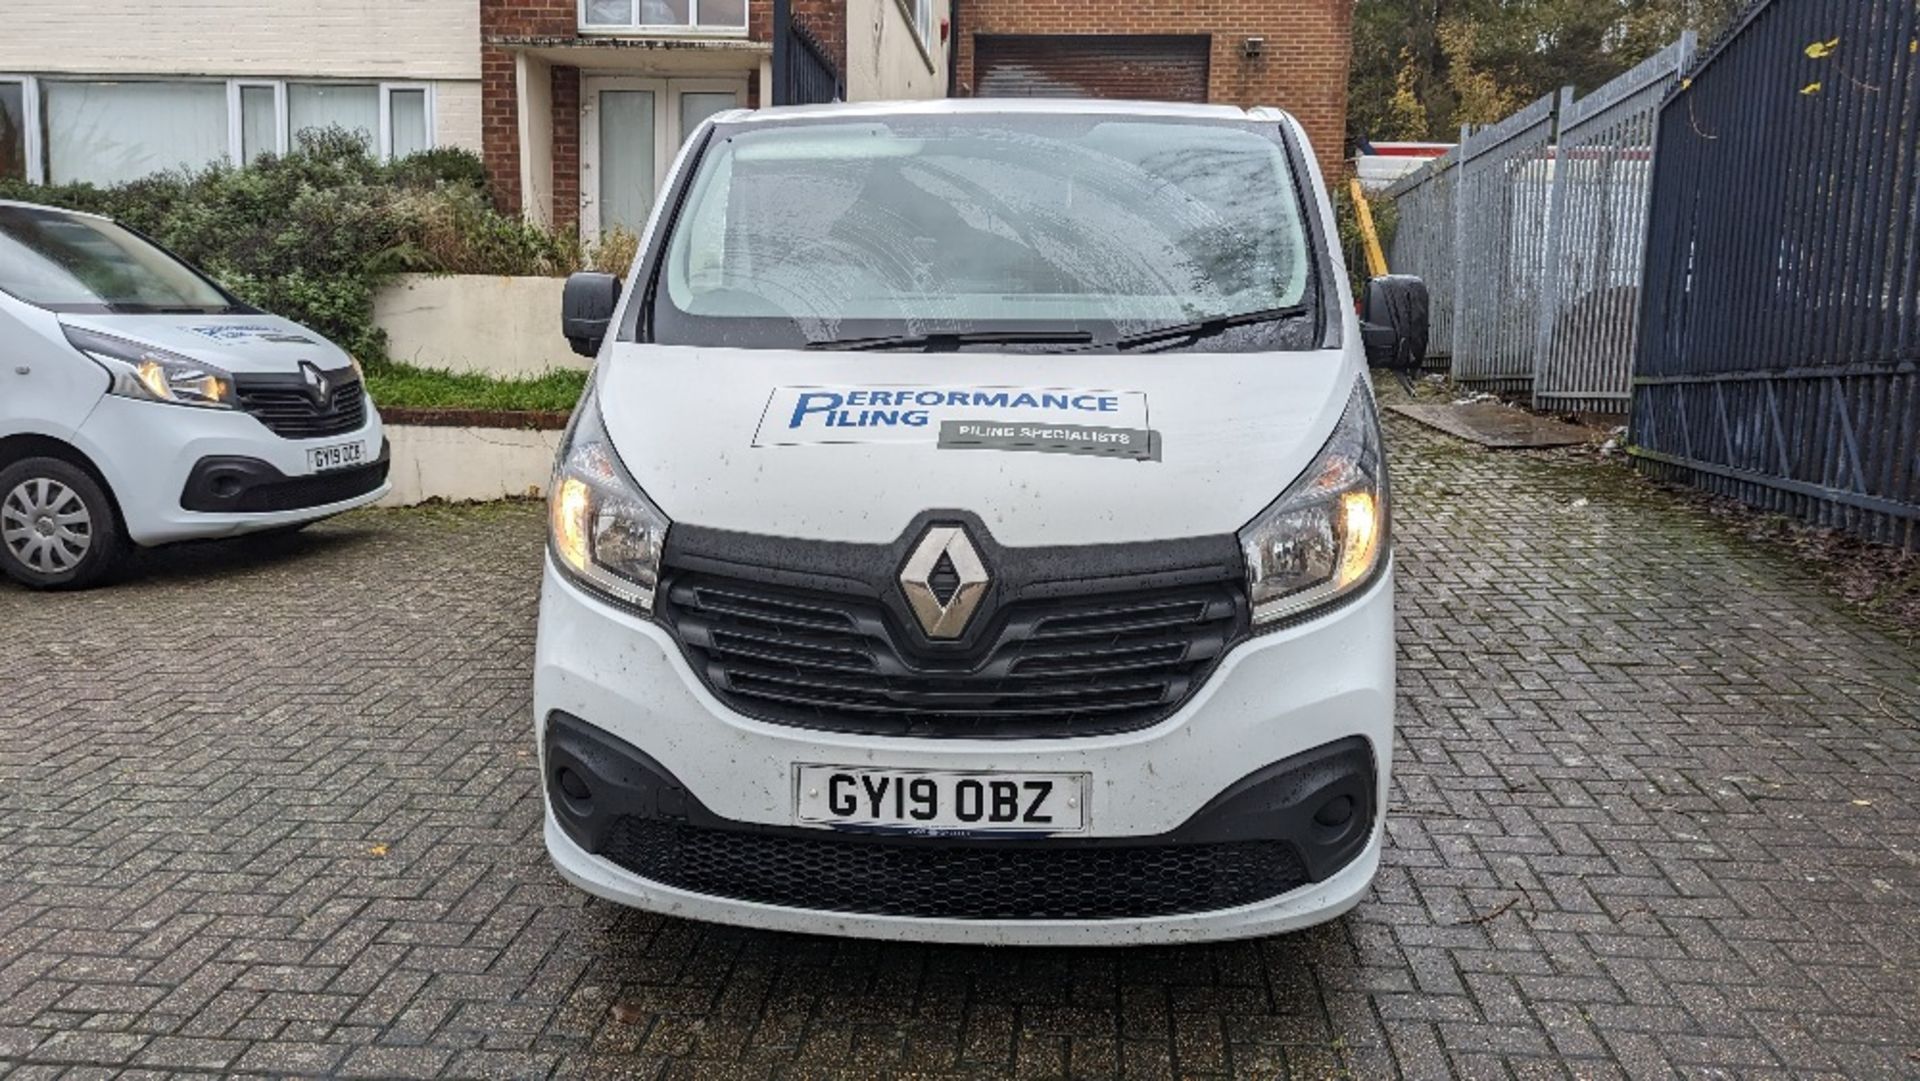 GY19 OBZ - Renault Trafic SL27 Business+ DC - Image 8 of 21